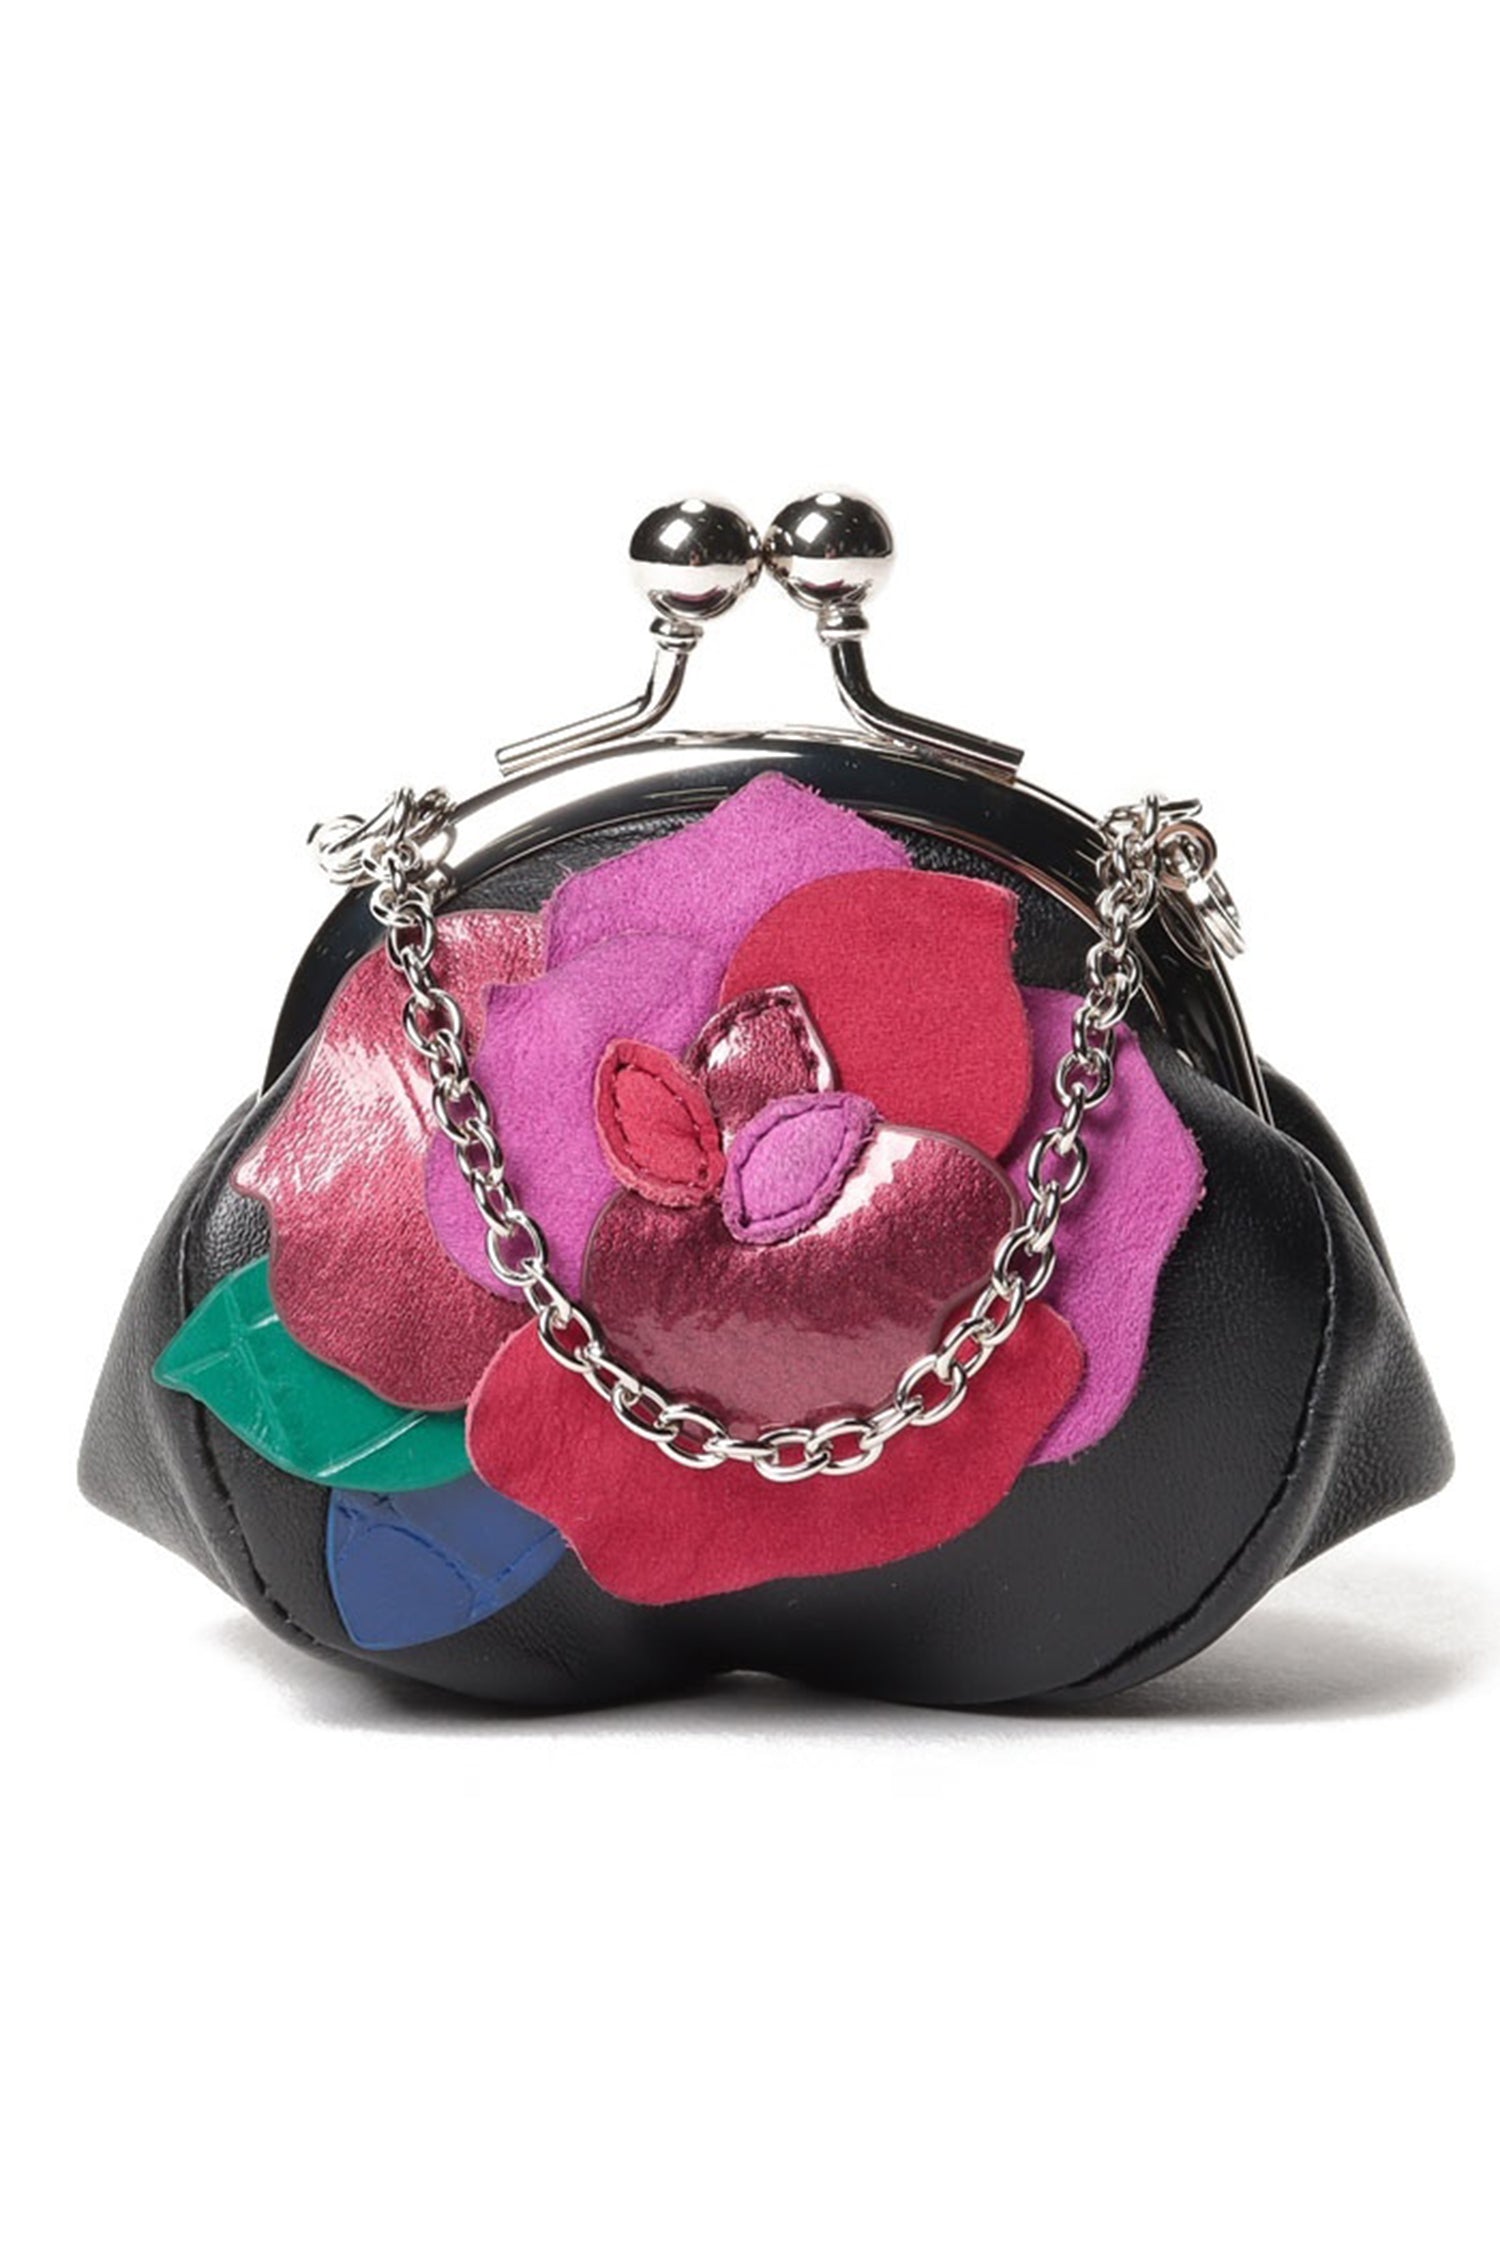 Candy Charm Mini Purse Black, with a large reddish flower in front, silver chain and big Clasp